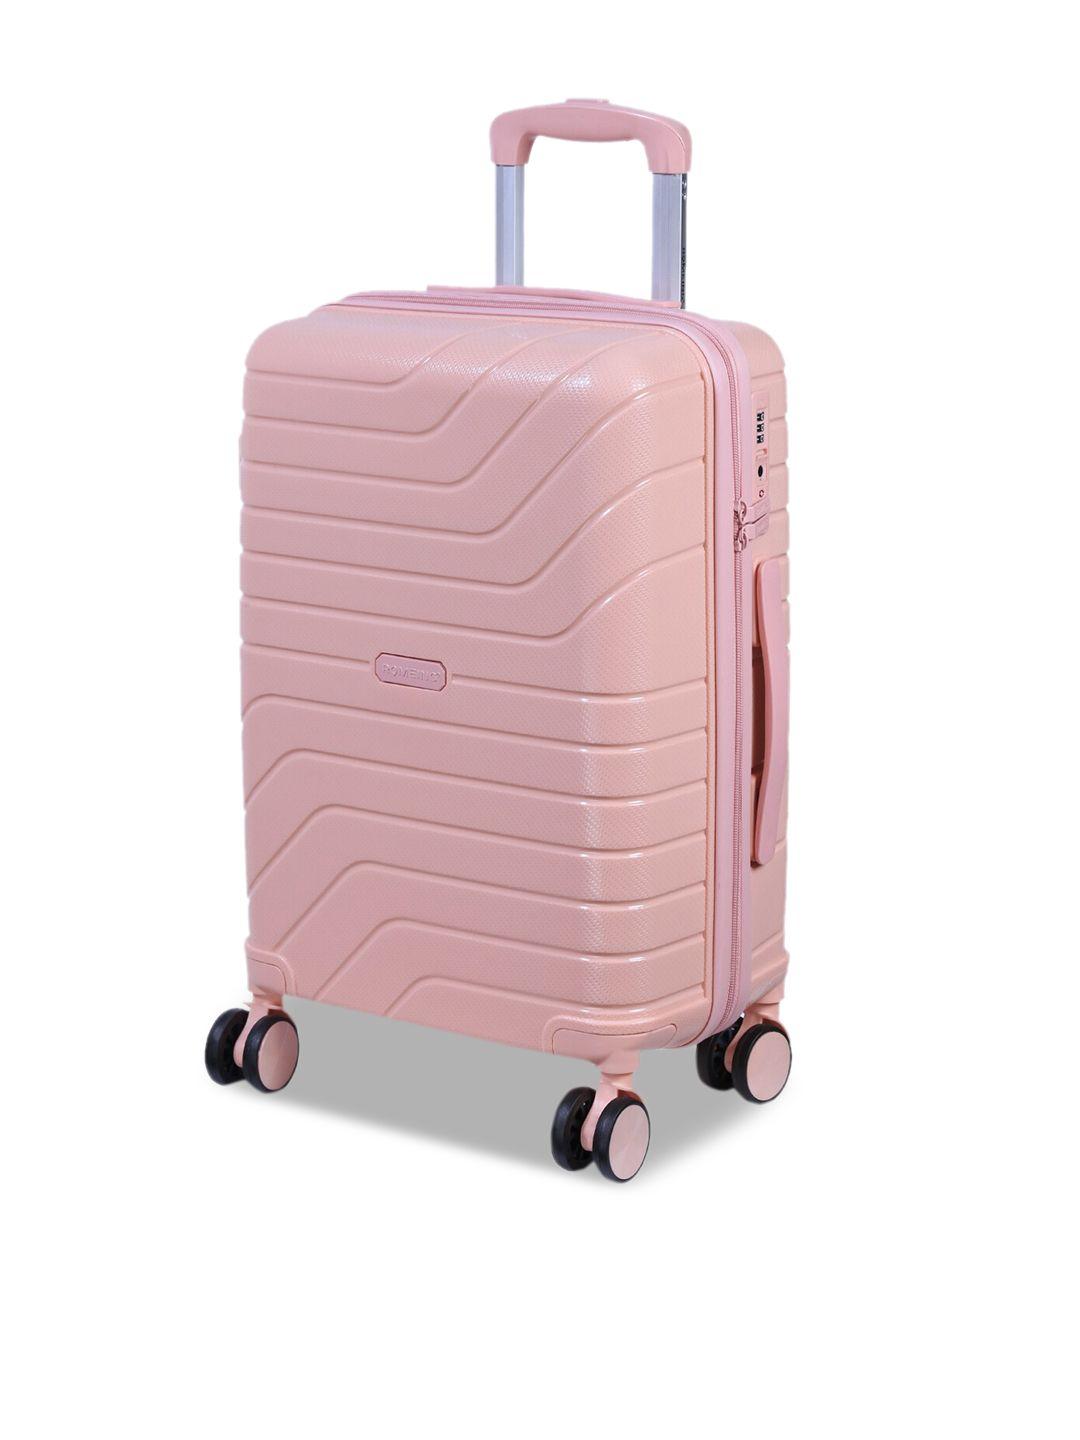 romeing tuscany pink textured hard-sided polypropylene cabin trolley suitcase